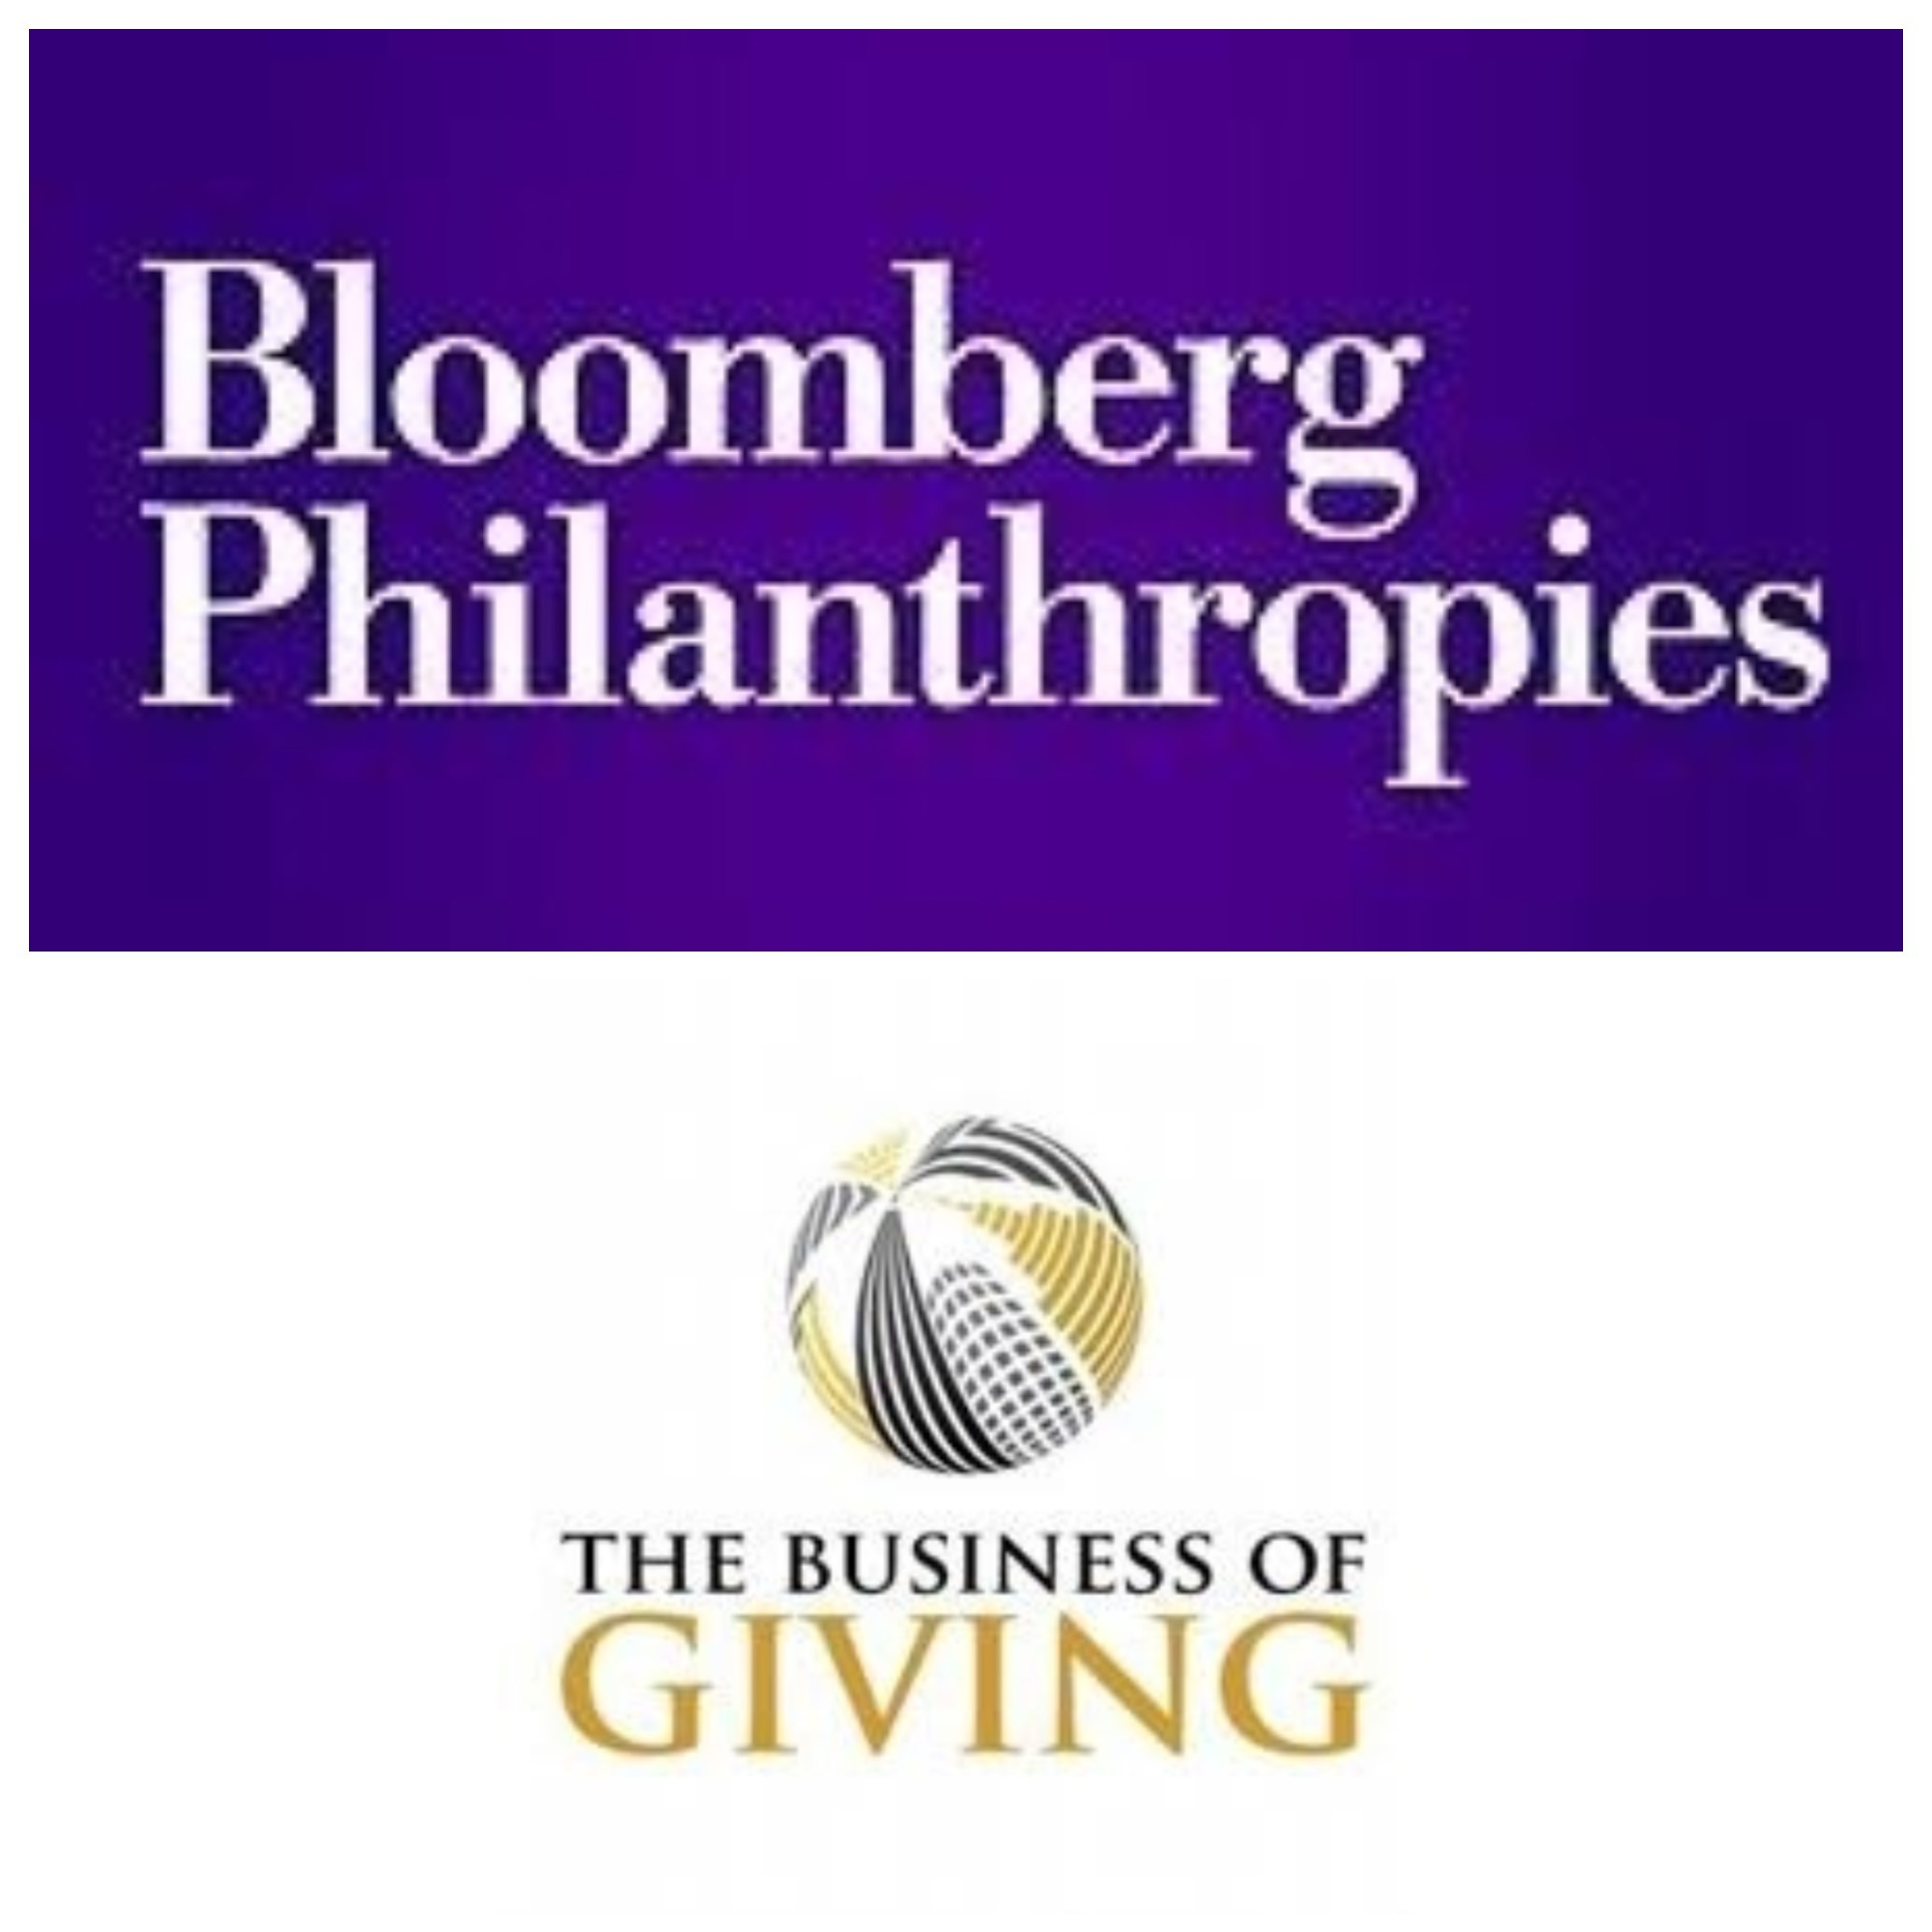 James Anderson, Head of Government Innovation Programs at Bloomberg Philanthropies